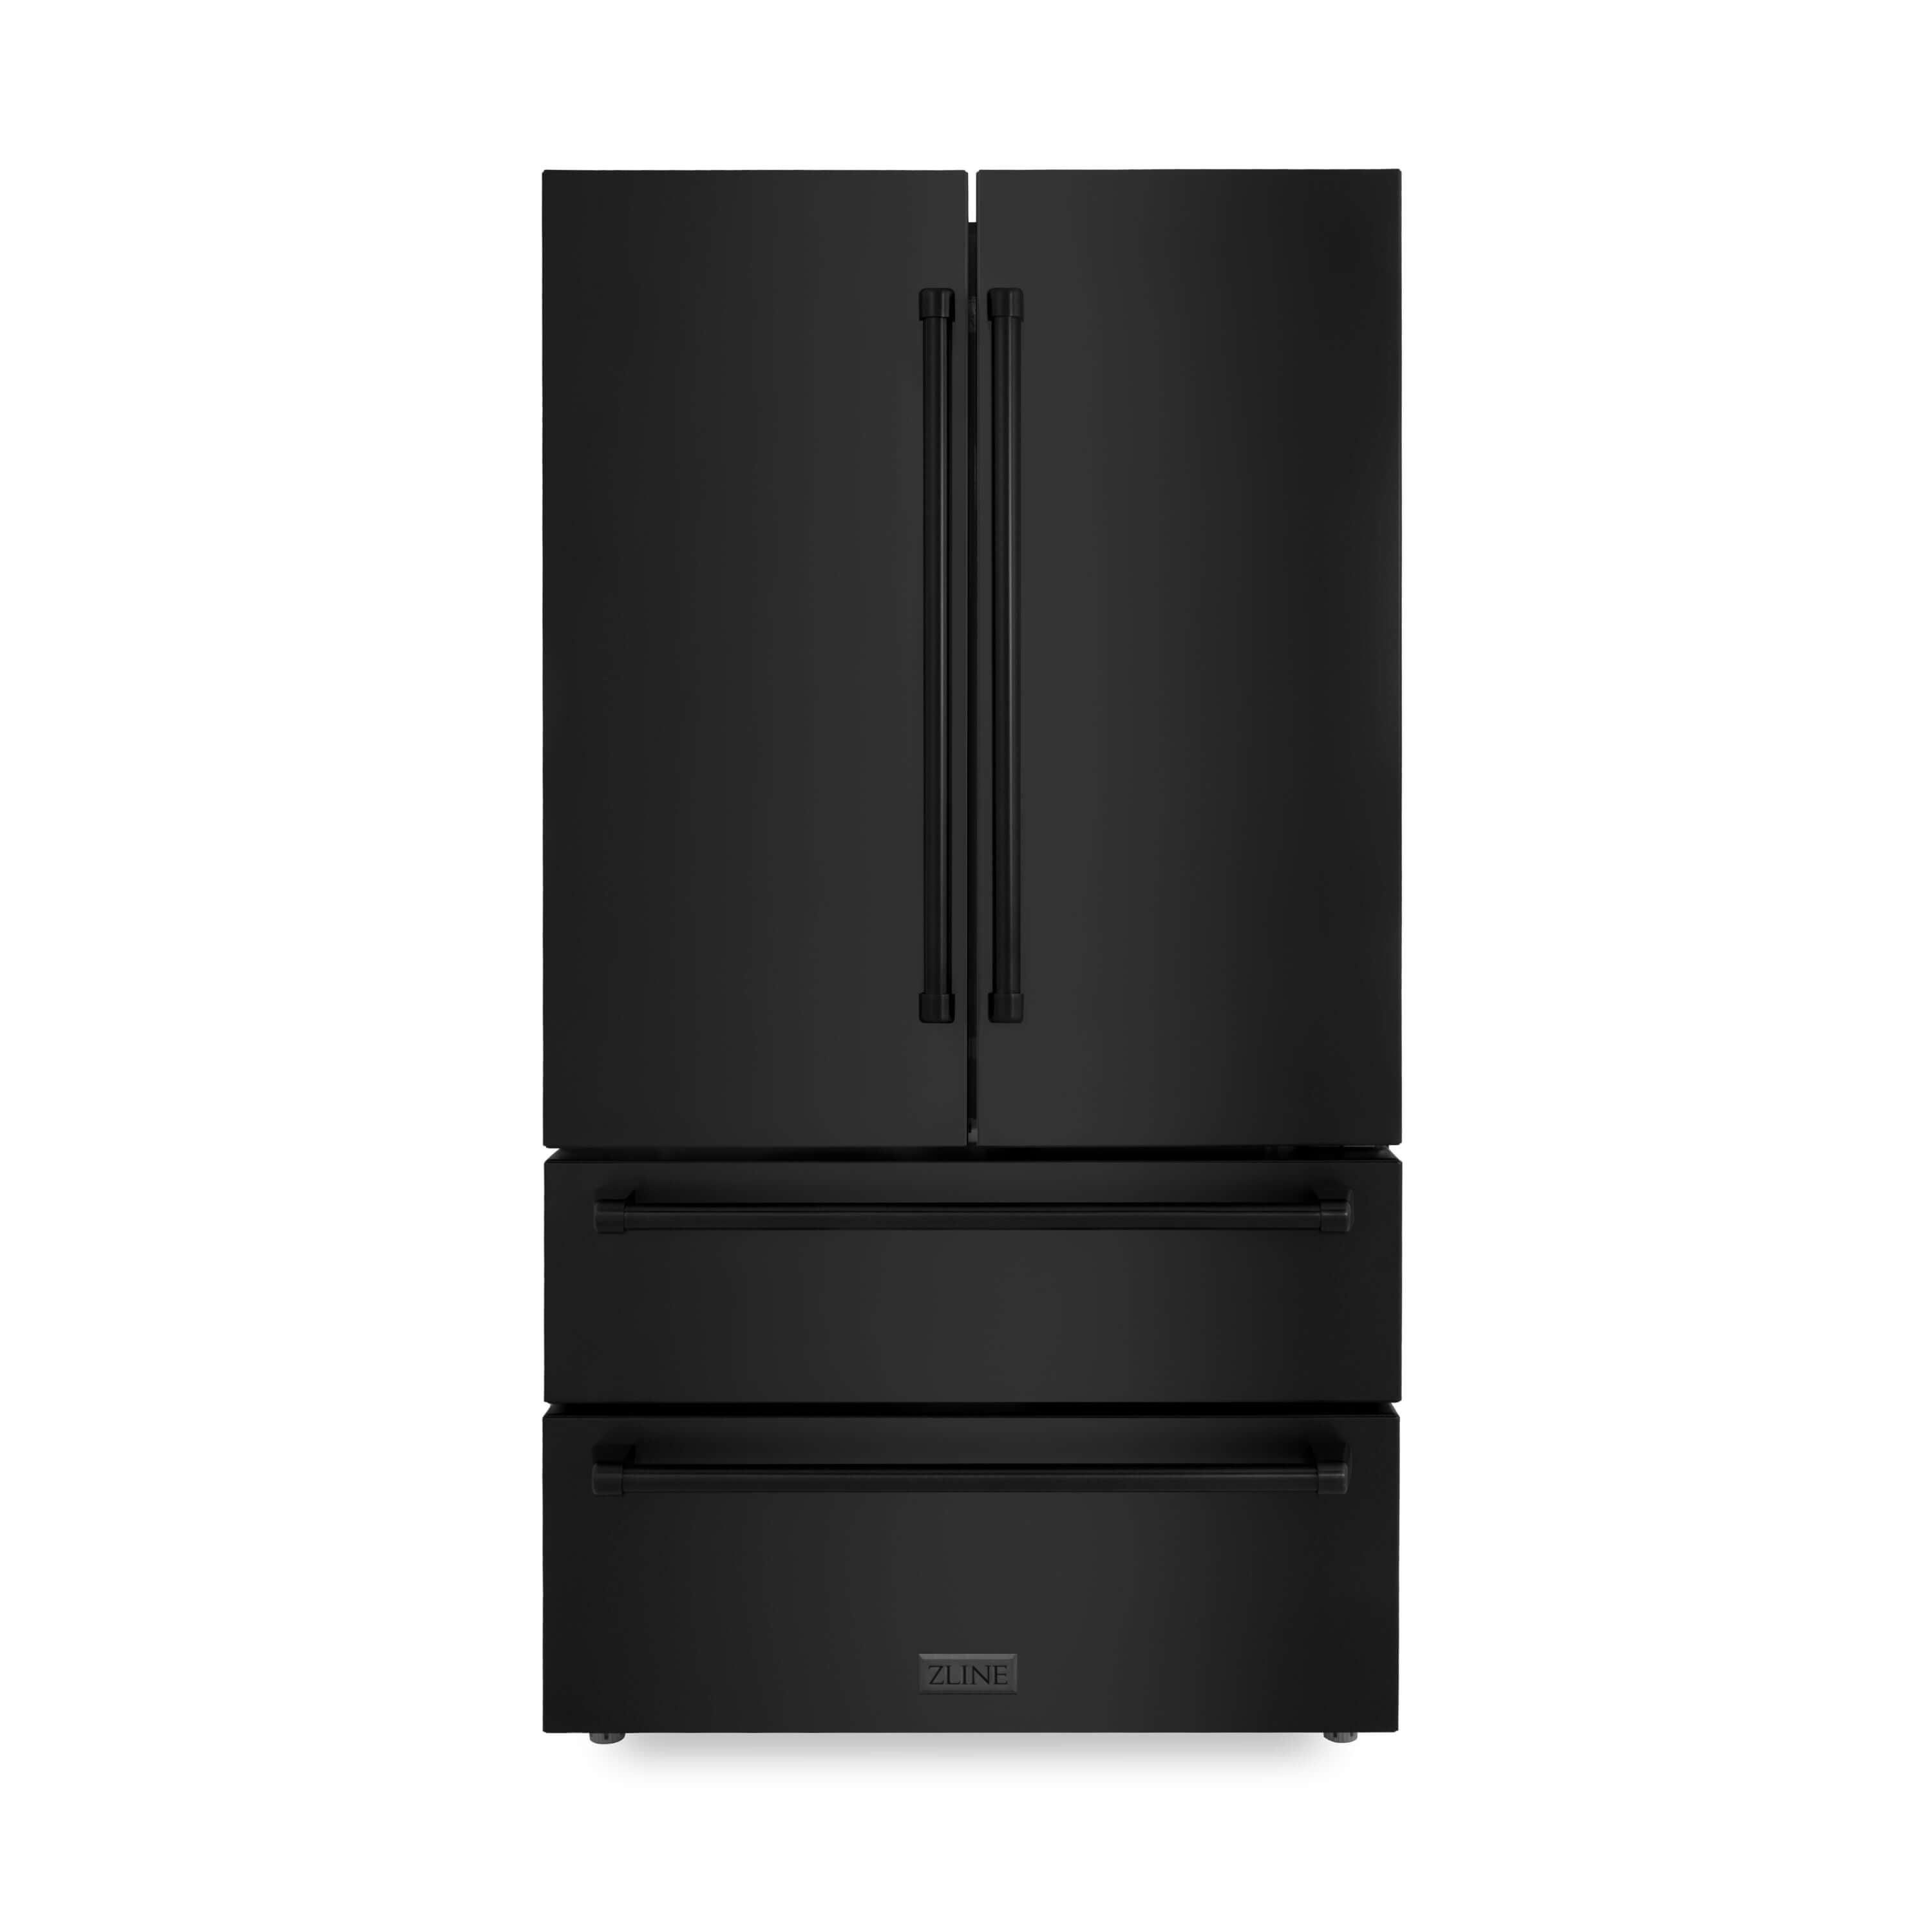 ZLINE Kitchen Package in Black Stainless Steel with 36 in. French Door Refrigerator, 36 in. Gas Stovetop, 36 in. Convertible Vent Range Hood, 30 in. Double Wall Oven, and 24 in. Tall Tub Dishwasher (5KPR-RTBRH36-AWDDWV) refrigerator front, closed.